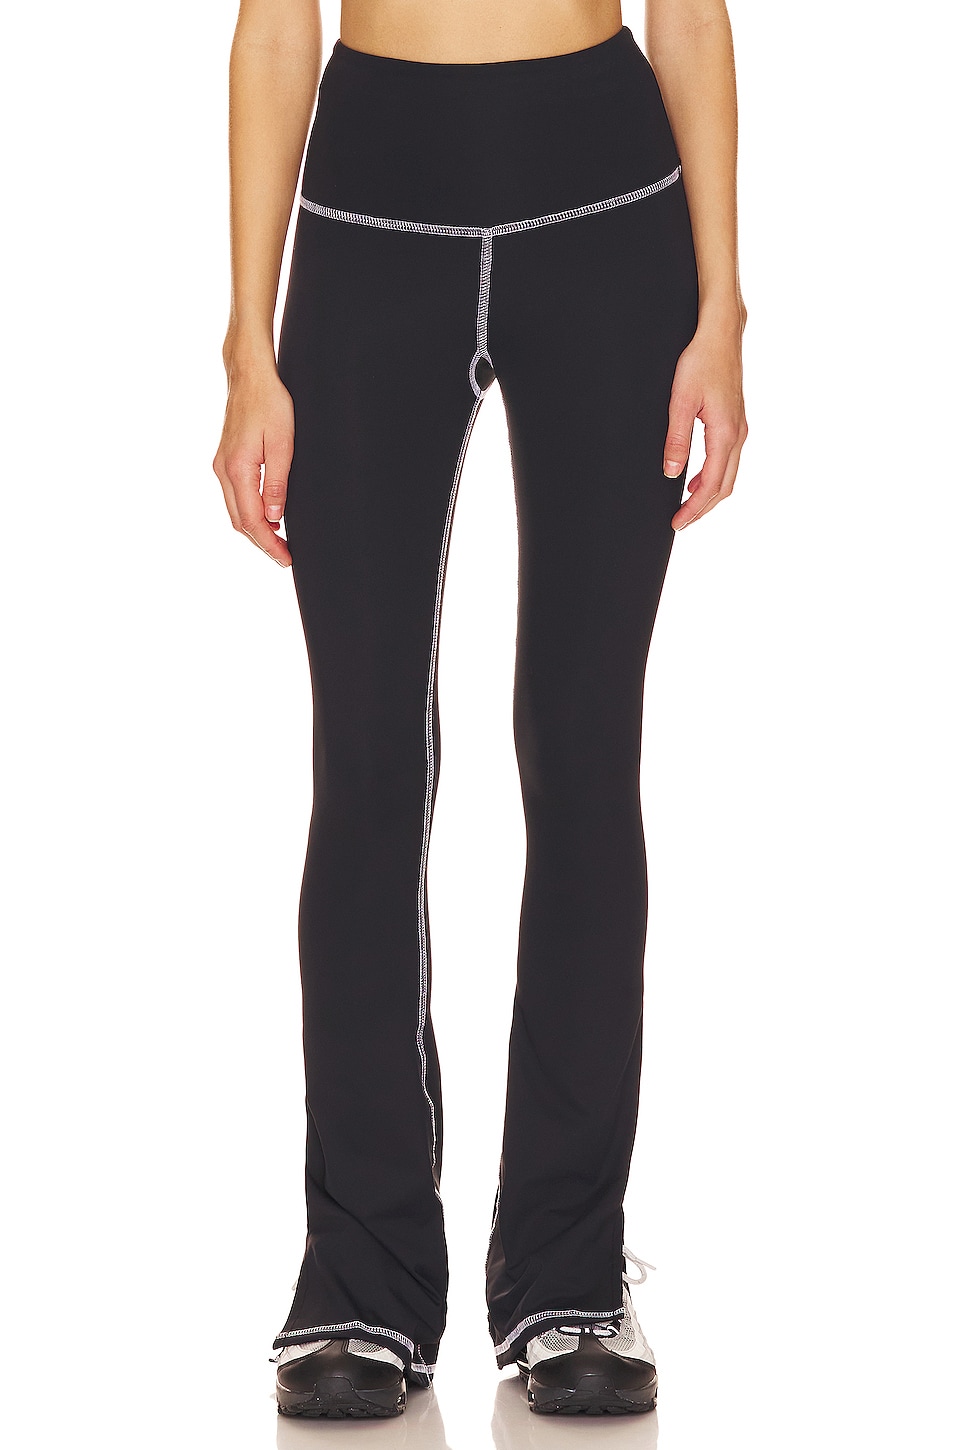 STRUT-THIS The Stitch Beau Pant in Black